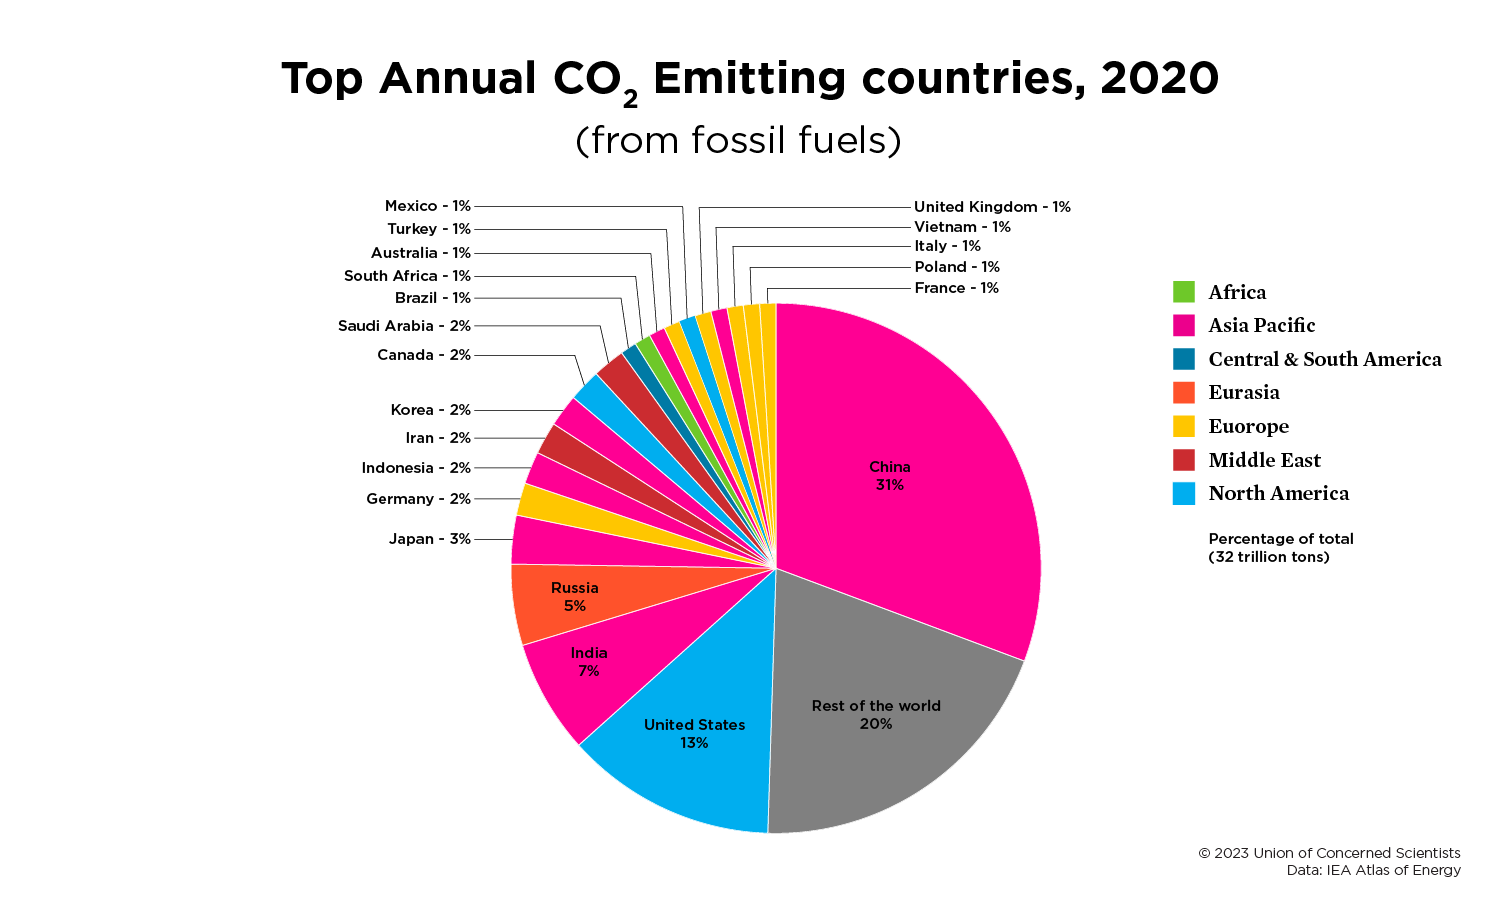 A pie chart of the top annual CO2 emitting countries in 2020.